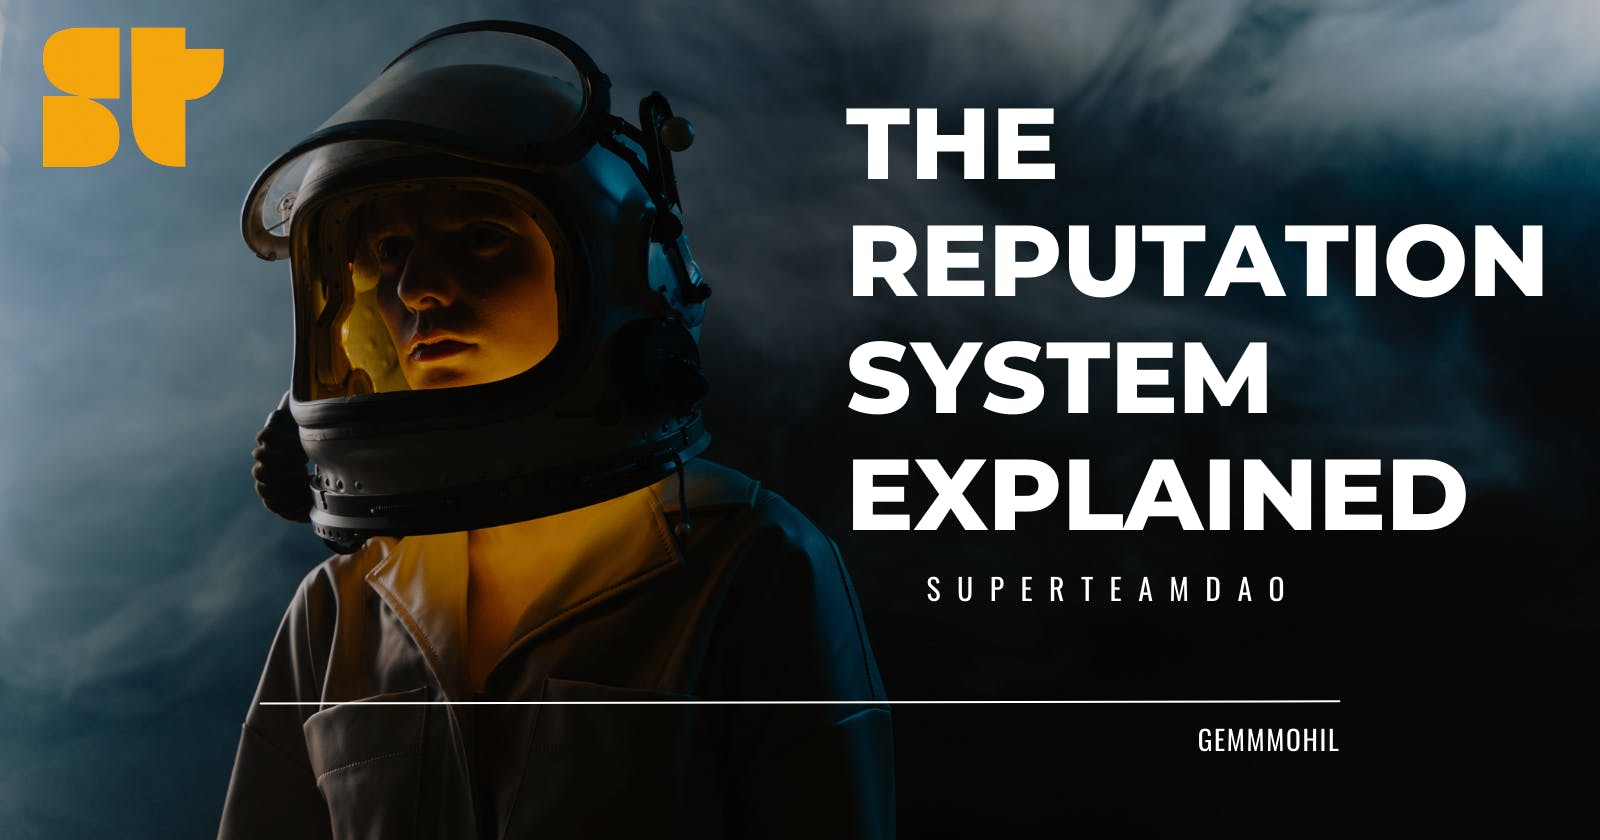 The Reputation System Explained!